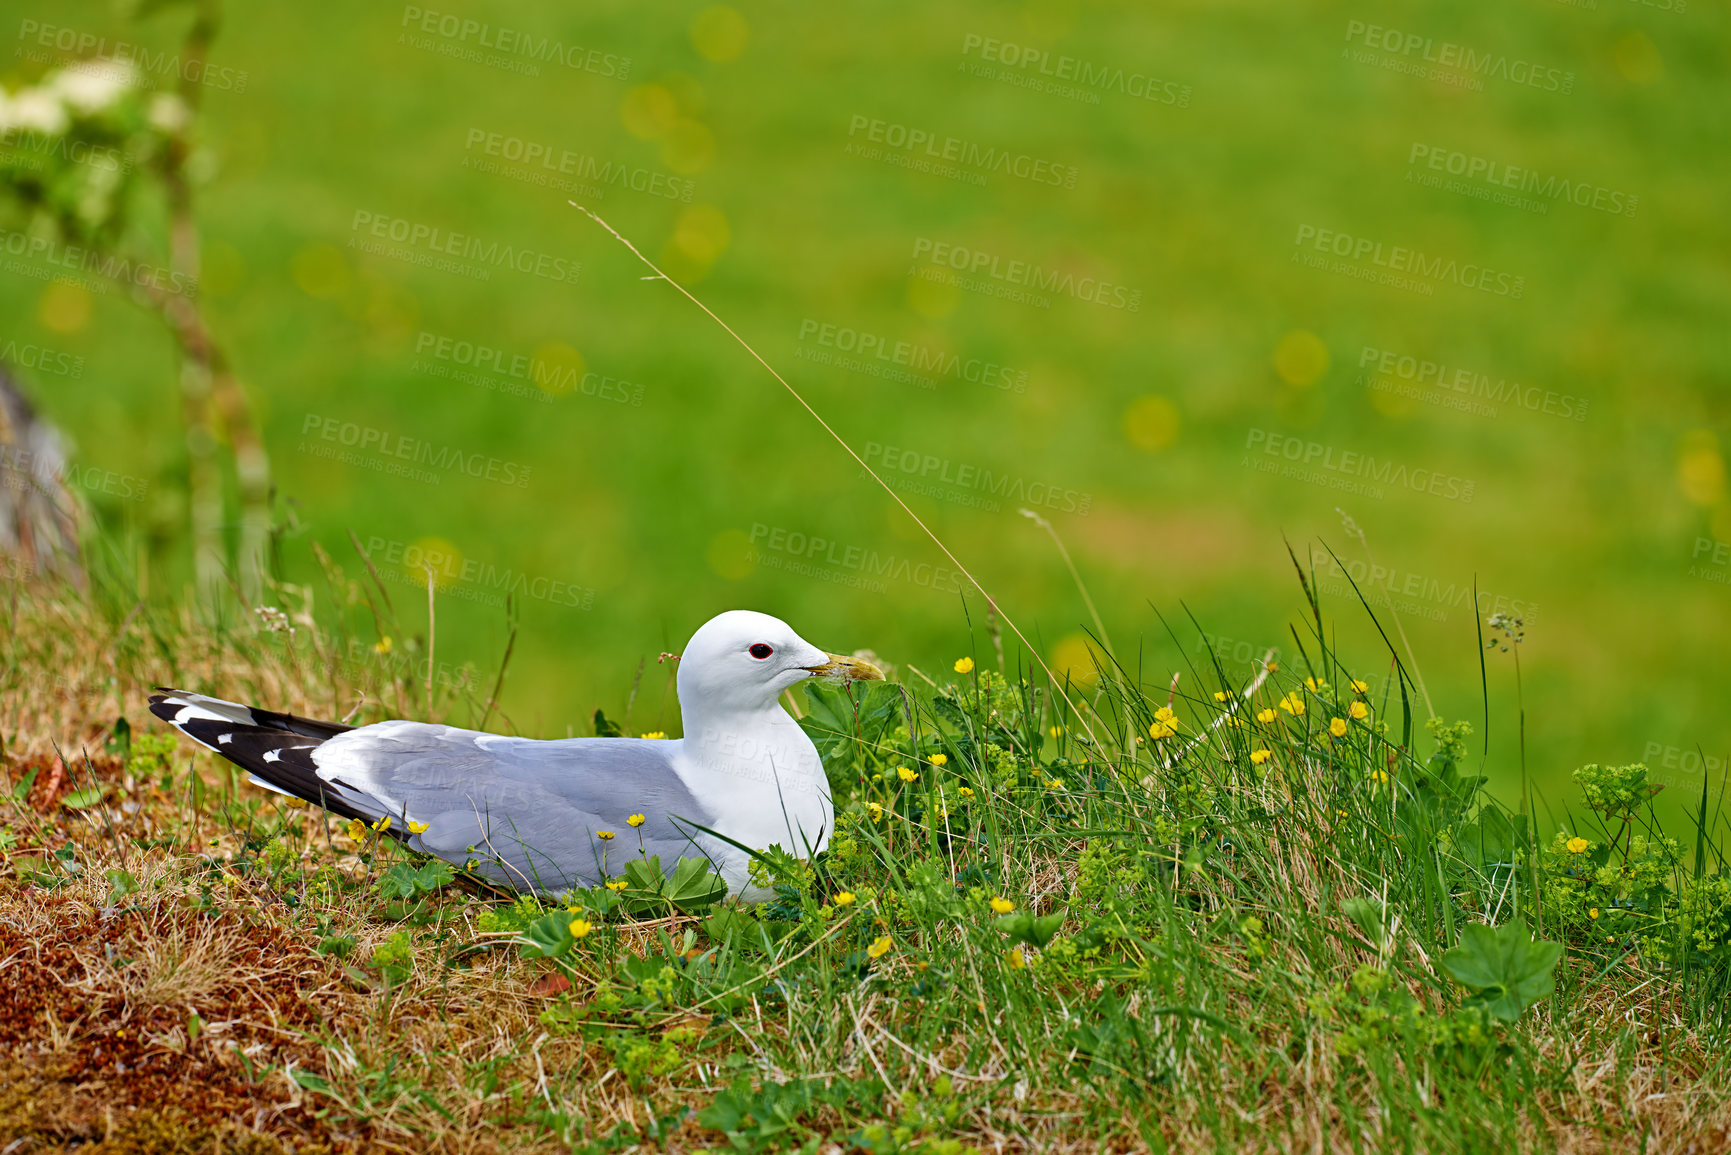 Buy stock photo A seagull standing in bright green grass outdoors in a park in its habitat and environment. A white and grey bird sitting in a lush pasture or meadow on a summer day or afternoon